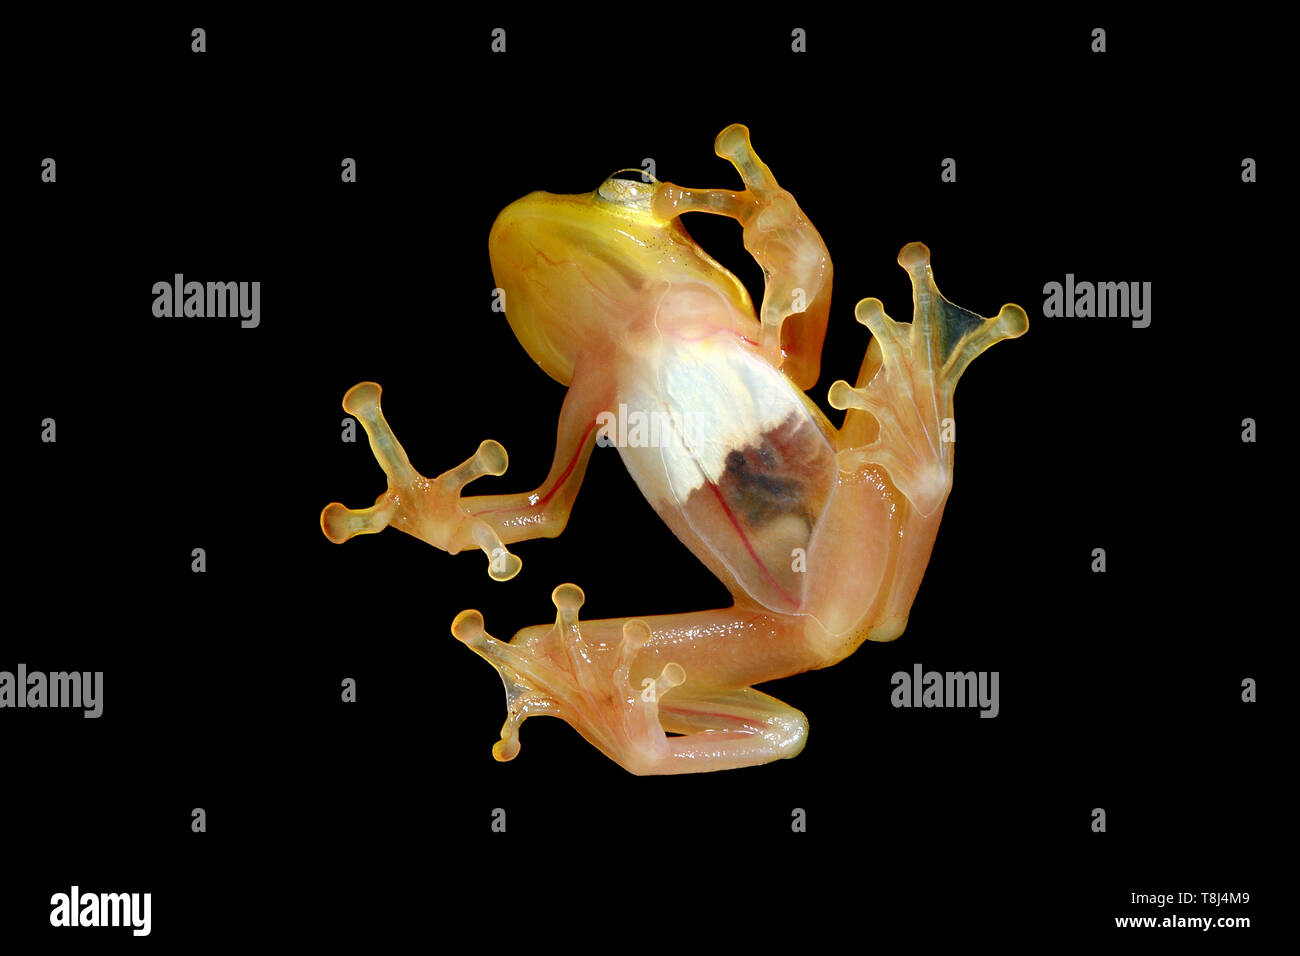 Golden tree frog on a piece of glass, Indonesia Stock Photo